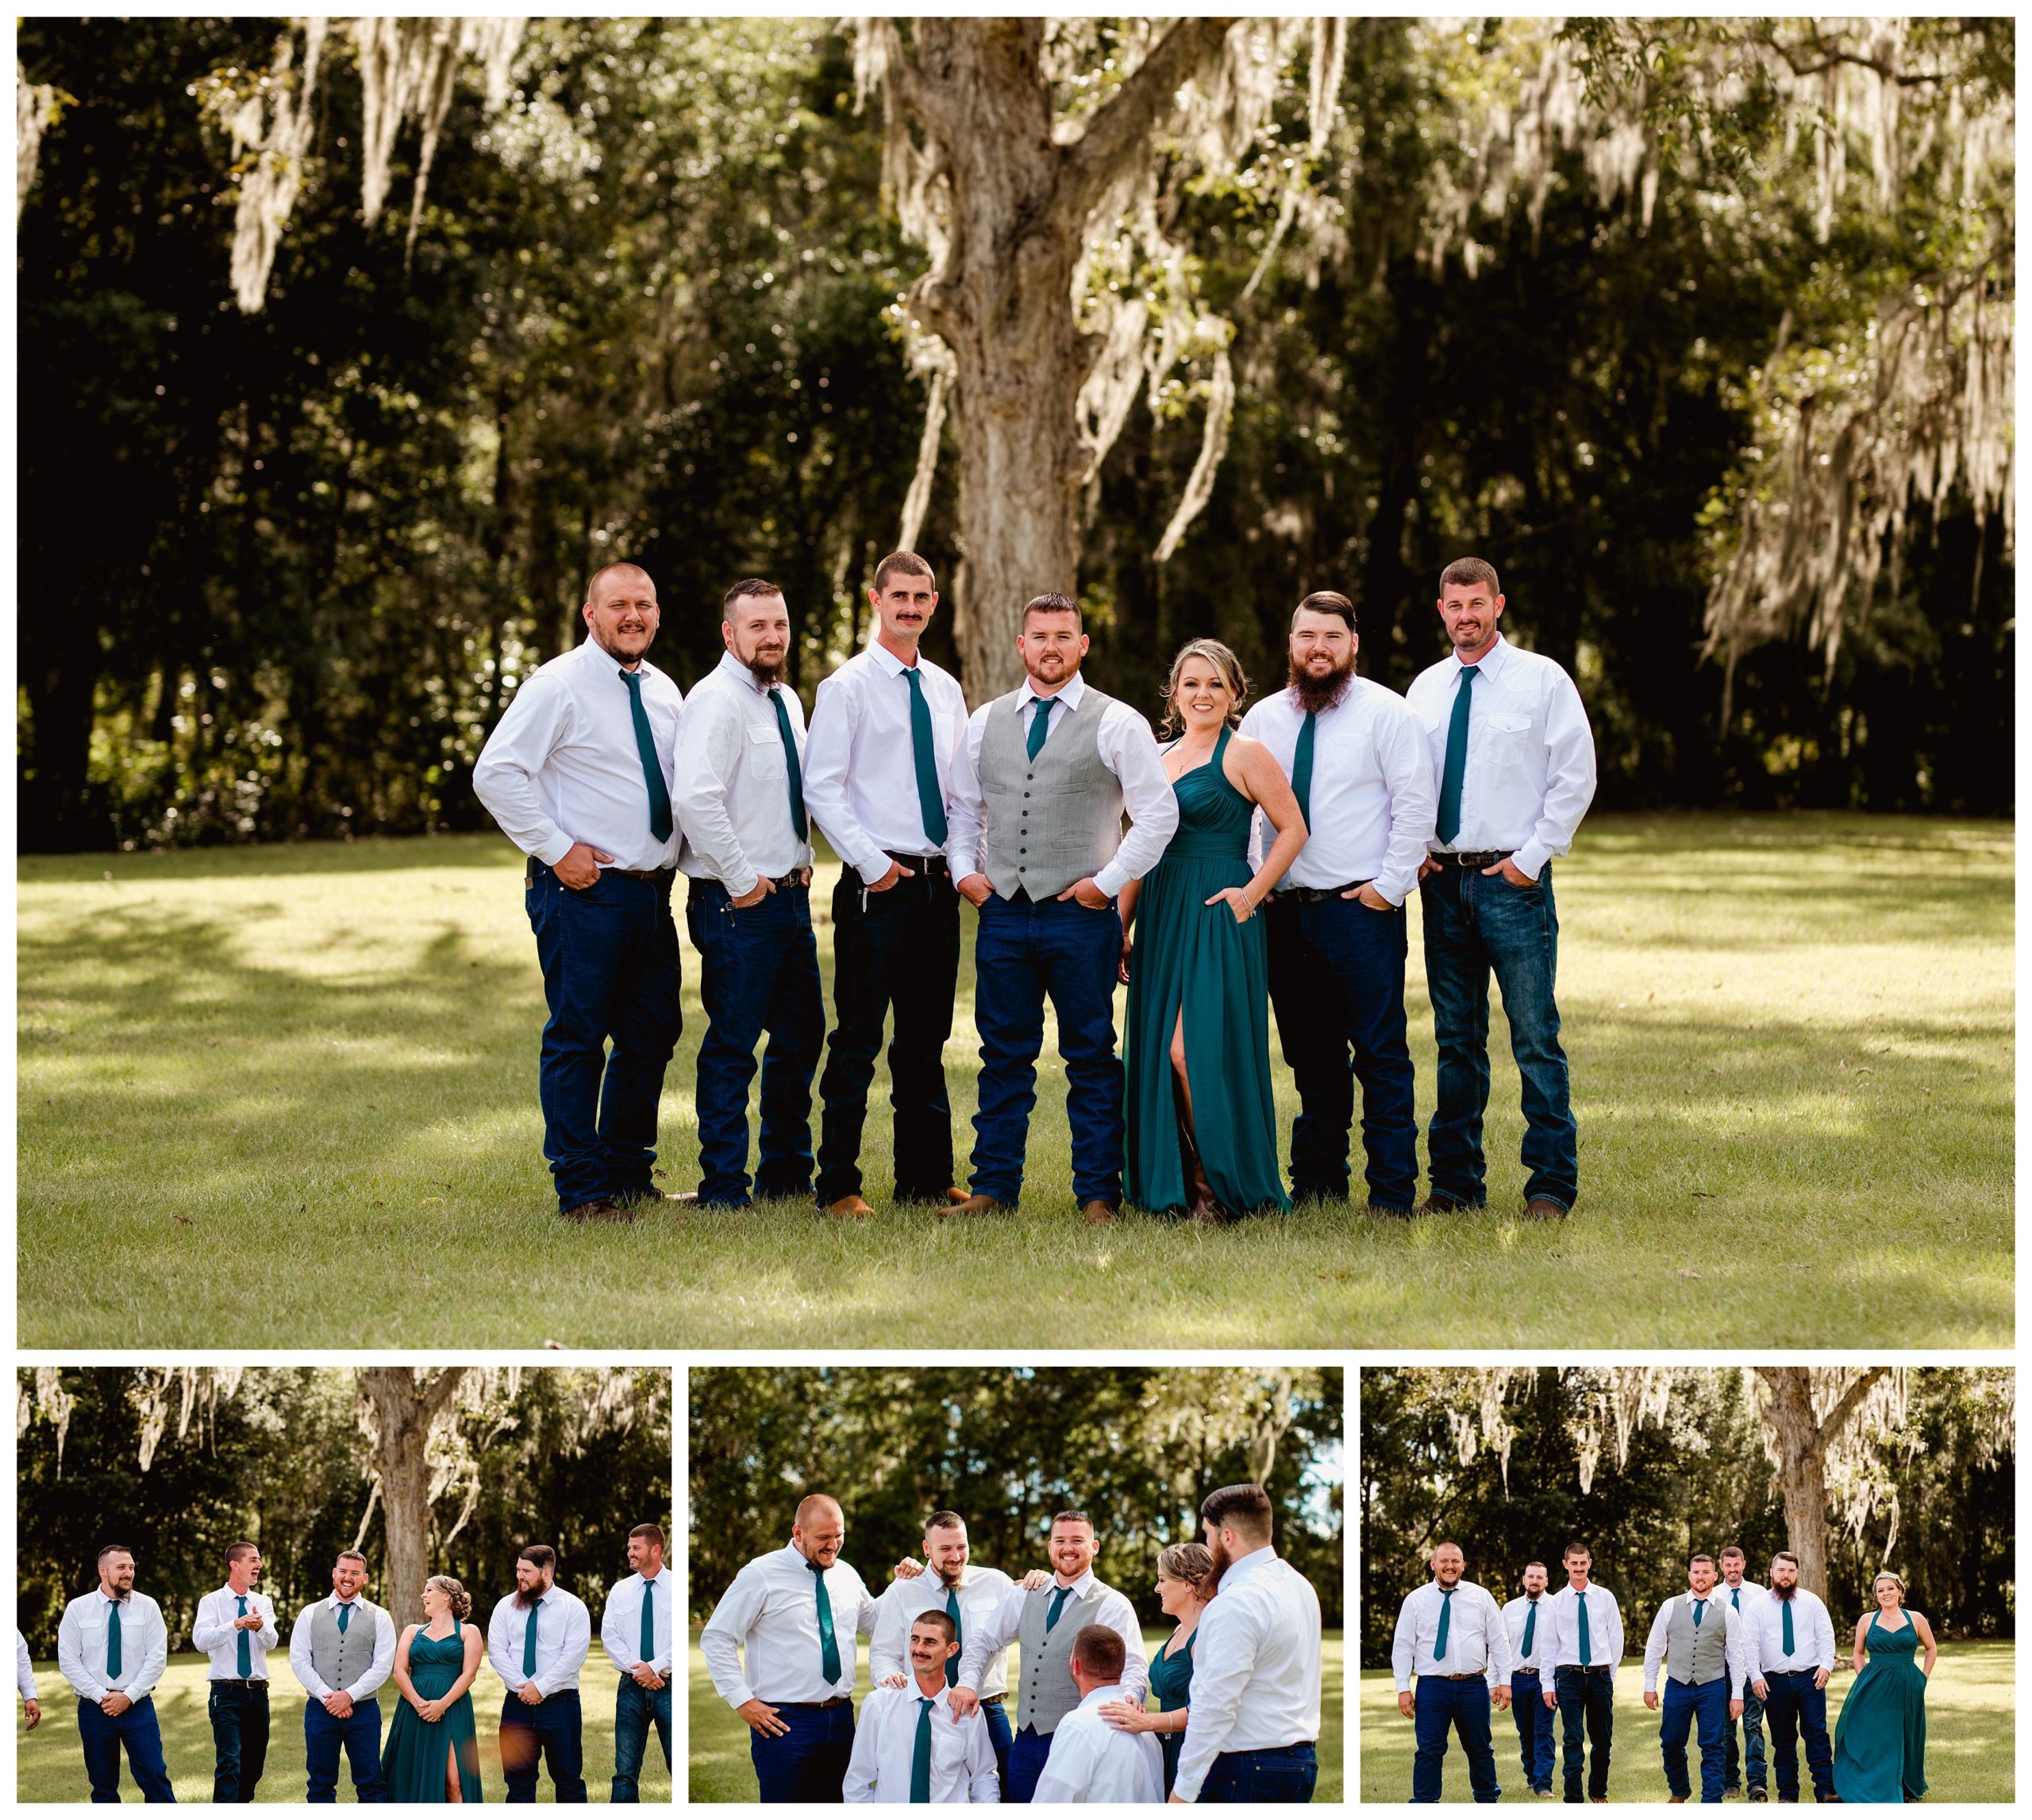 Groom with his groomsmen during outside wedding ceremony,